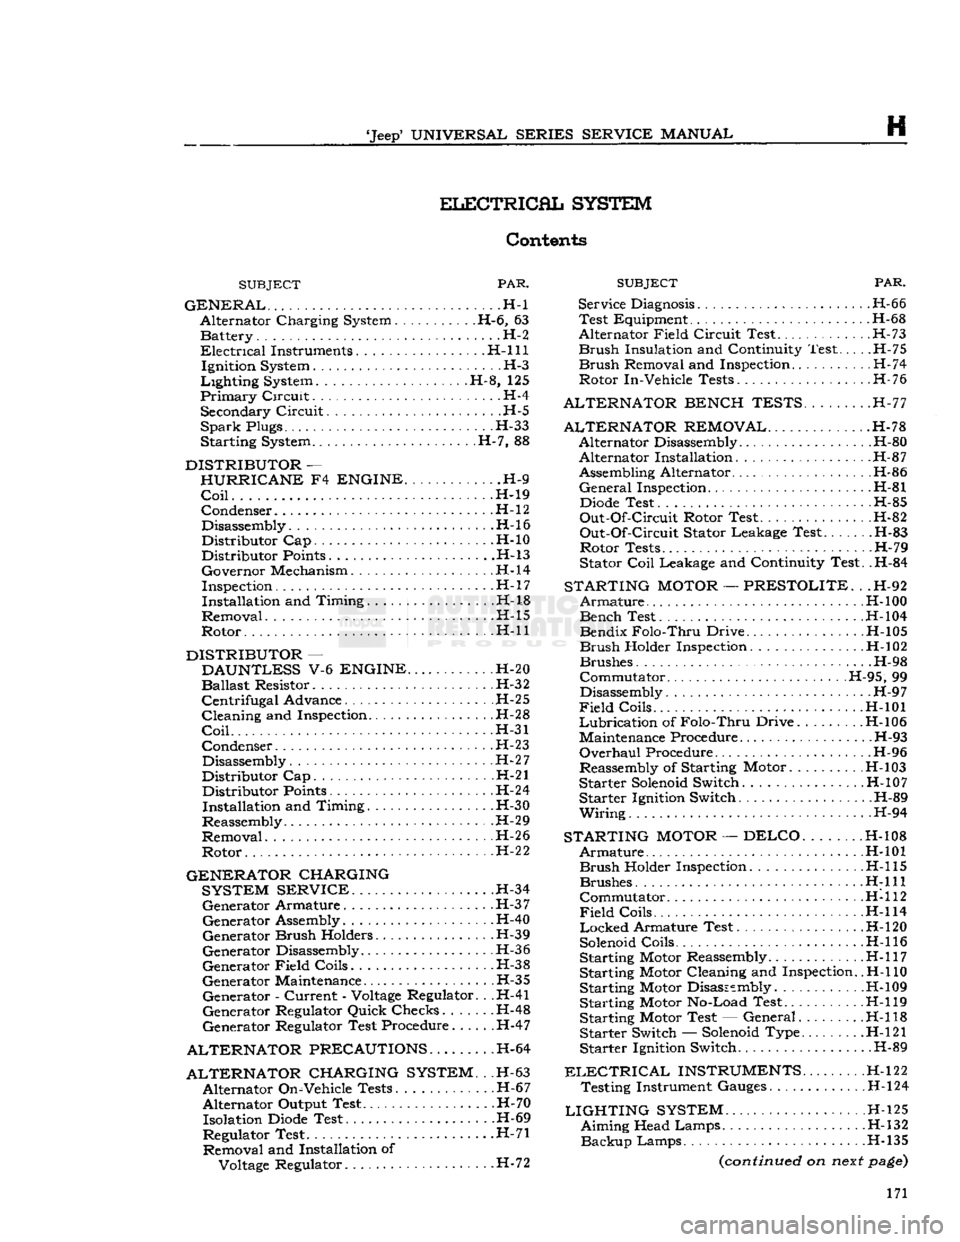 JEEP CJ 1953  Service Manual 
Jeep
 UNIVERSAL SERIES SERVICE
 MANUAL 

H 
ELECTRICAL
 SYSTEM 

Contents 

SUBJECT
 PAR. 

GENERAL
 . -H-l  Alternator Charging System H-6, 63 Battery. . . .H-2 

Electrical
 Instruments. H-l 11  